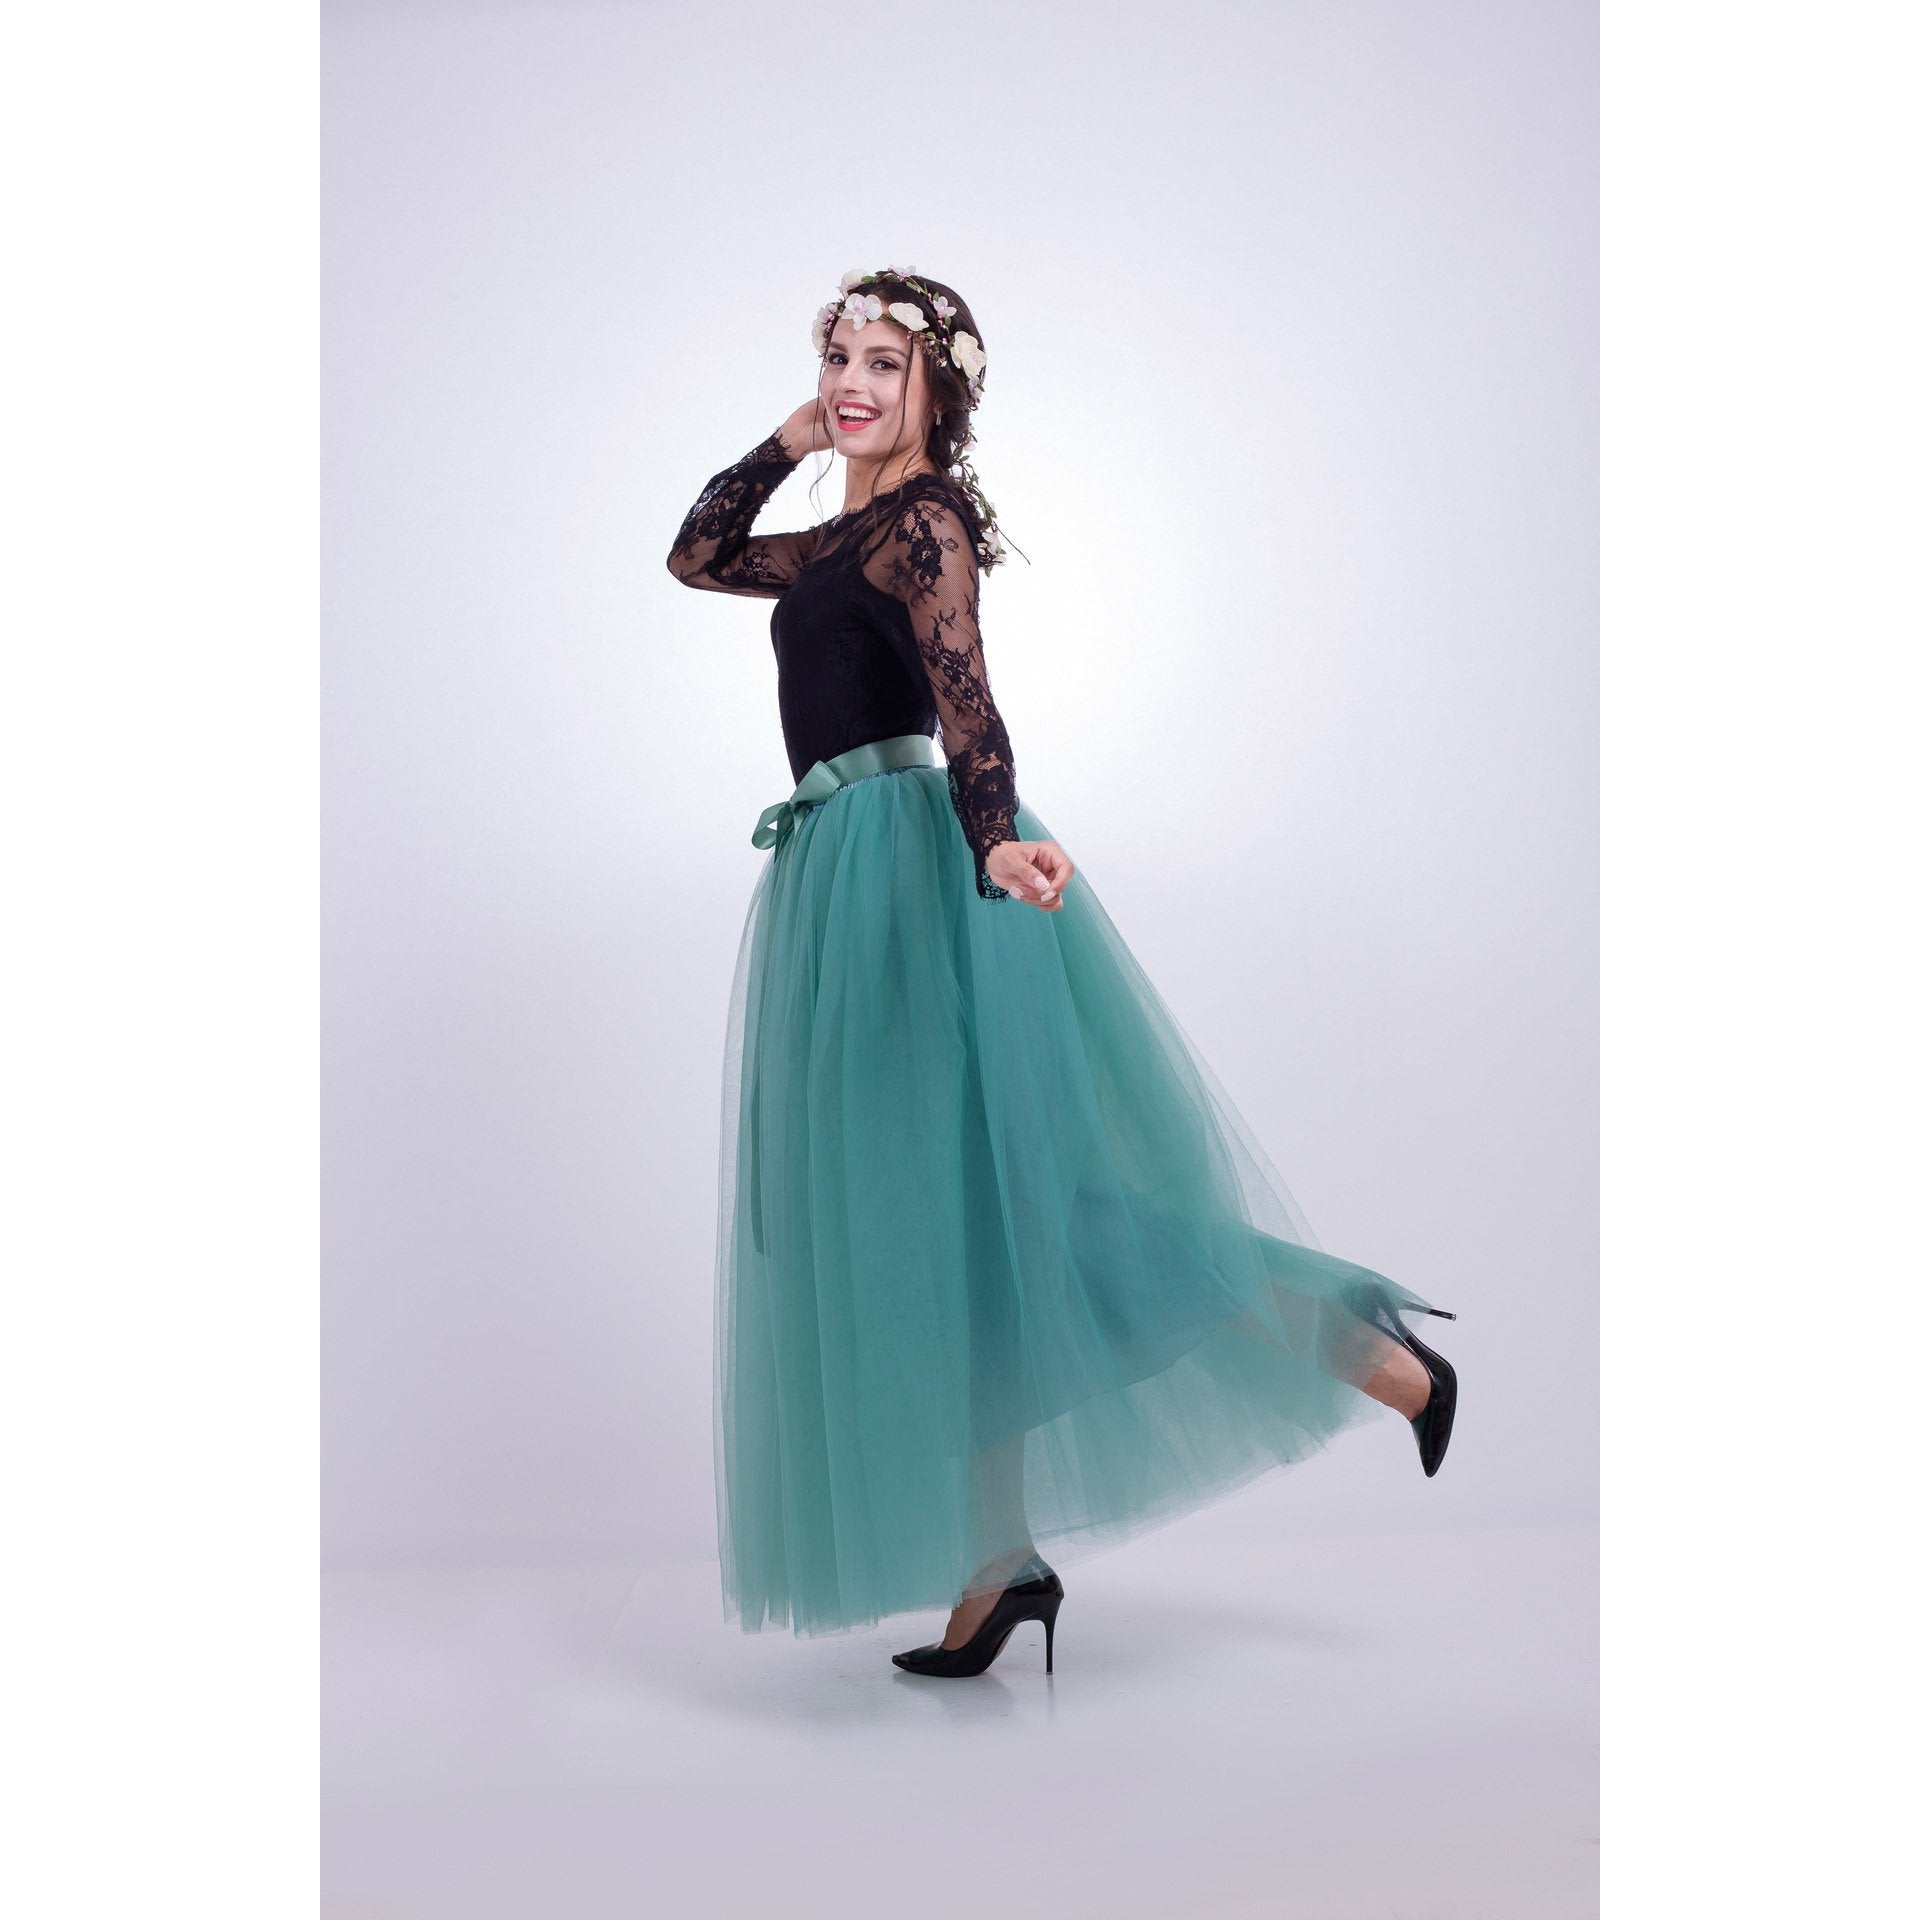 Tulle High Waist Pure Color Loose Swing Long Prom Party Skirt